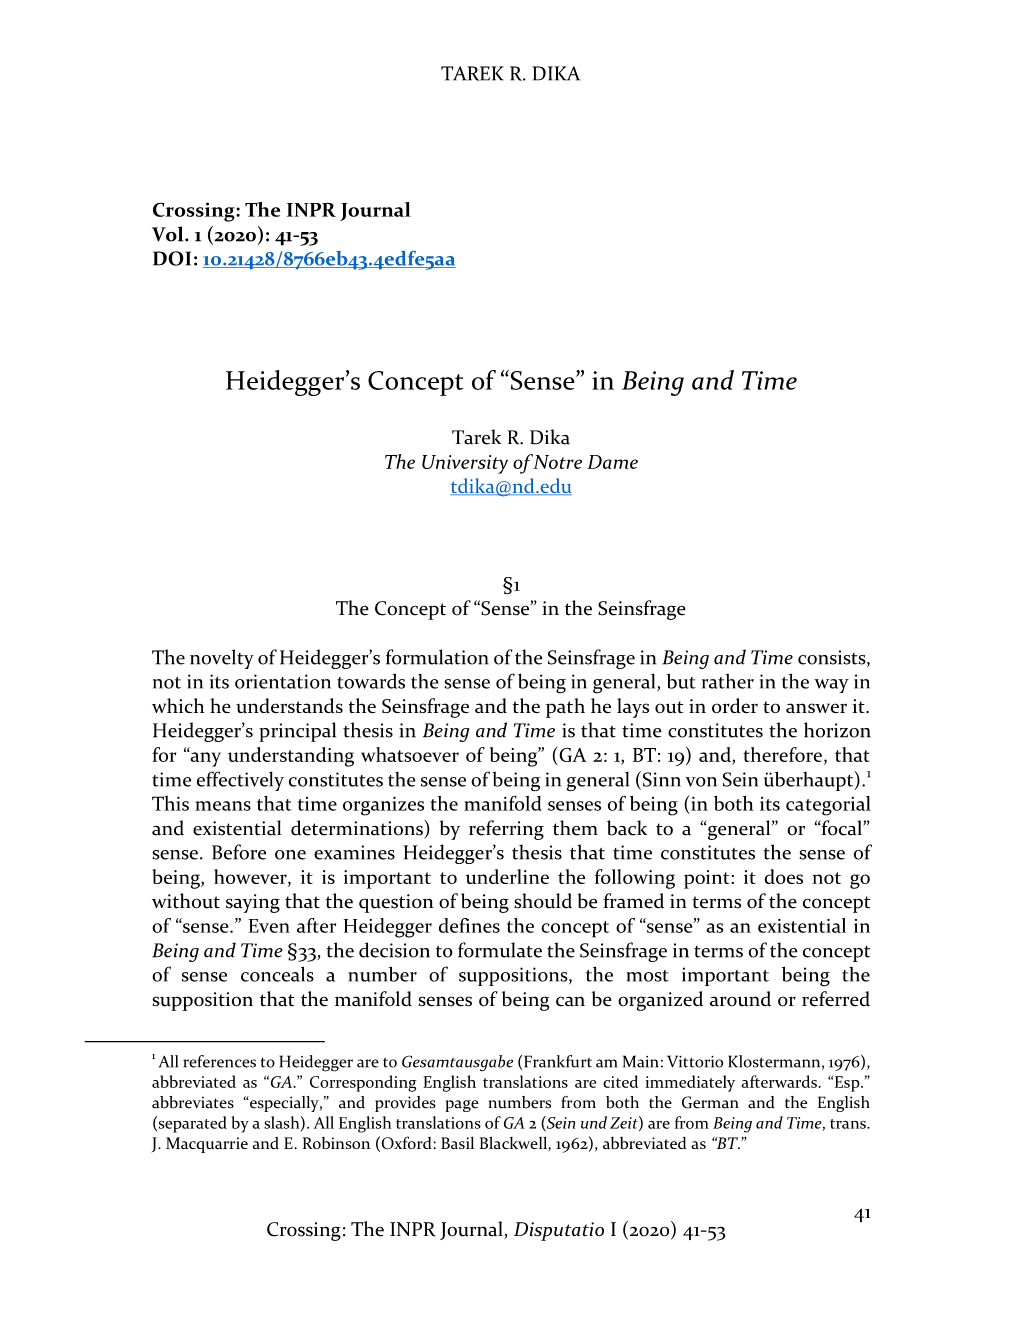 Heidegger's Concept of “Sense” in Being and Time